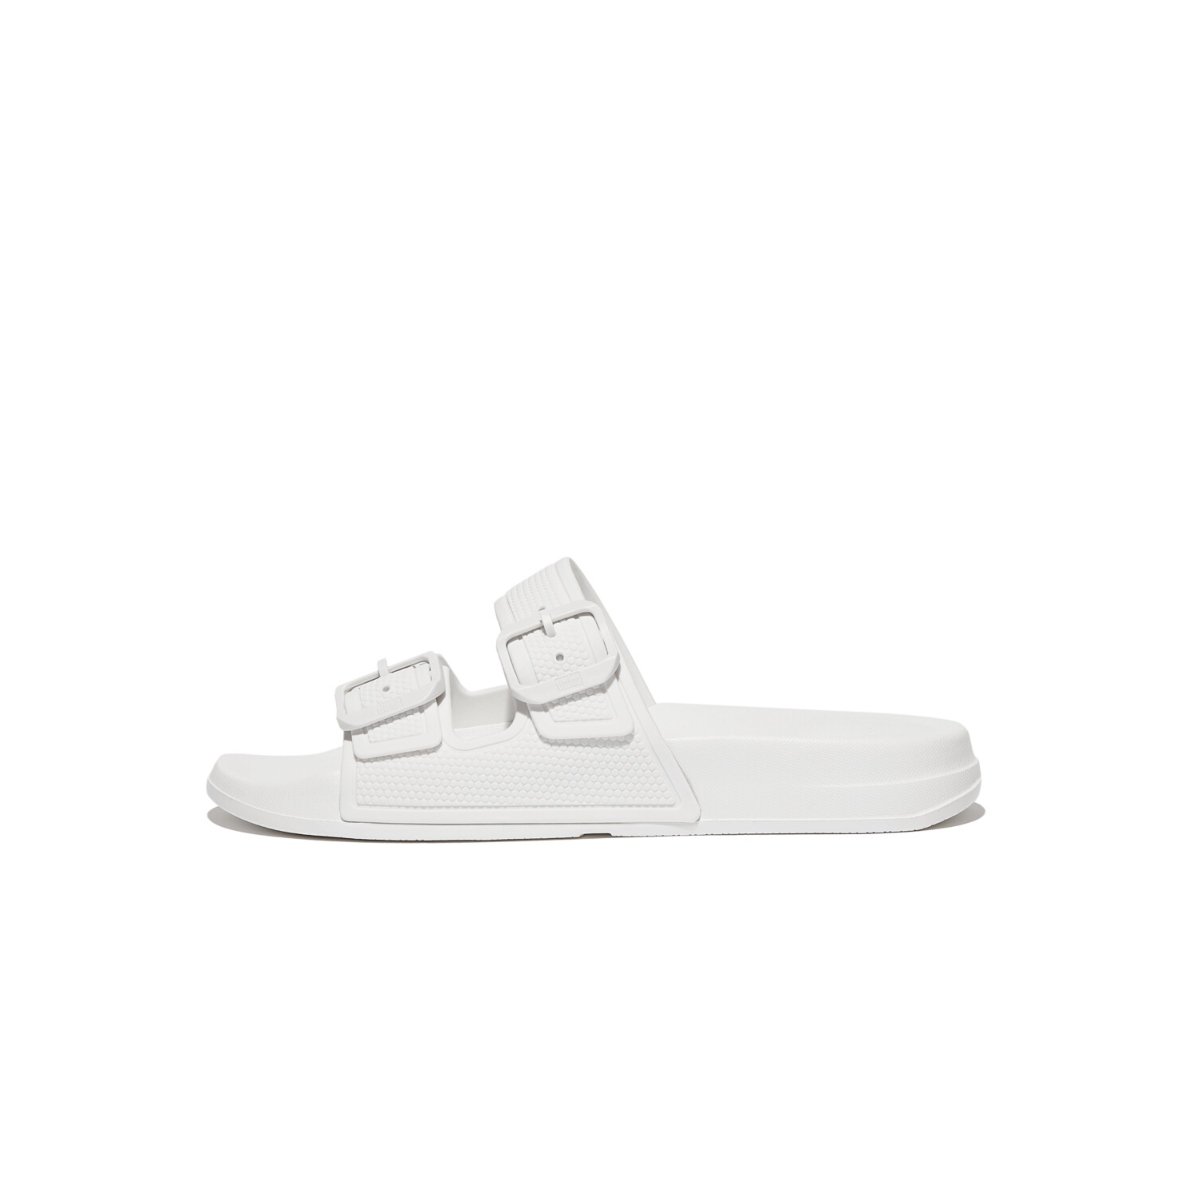 FitFlop iQUSHION Two-Bar Buckle Slides Urban White front view